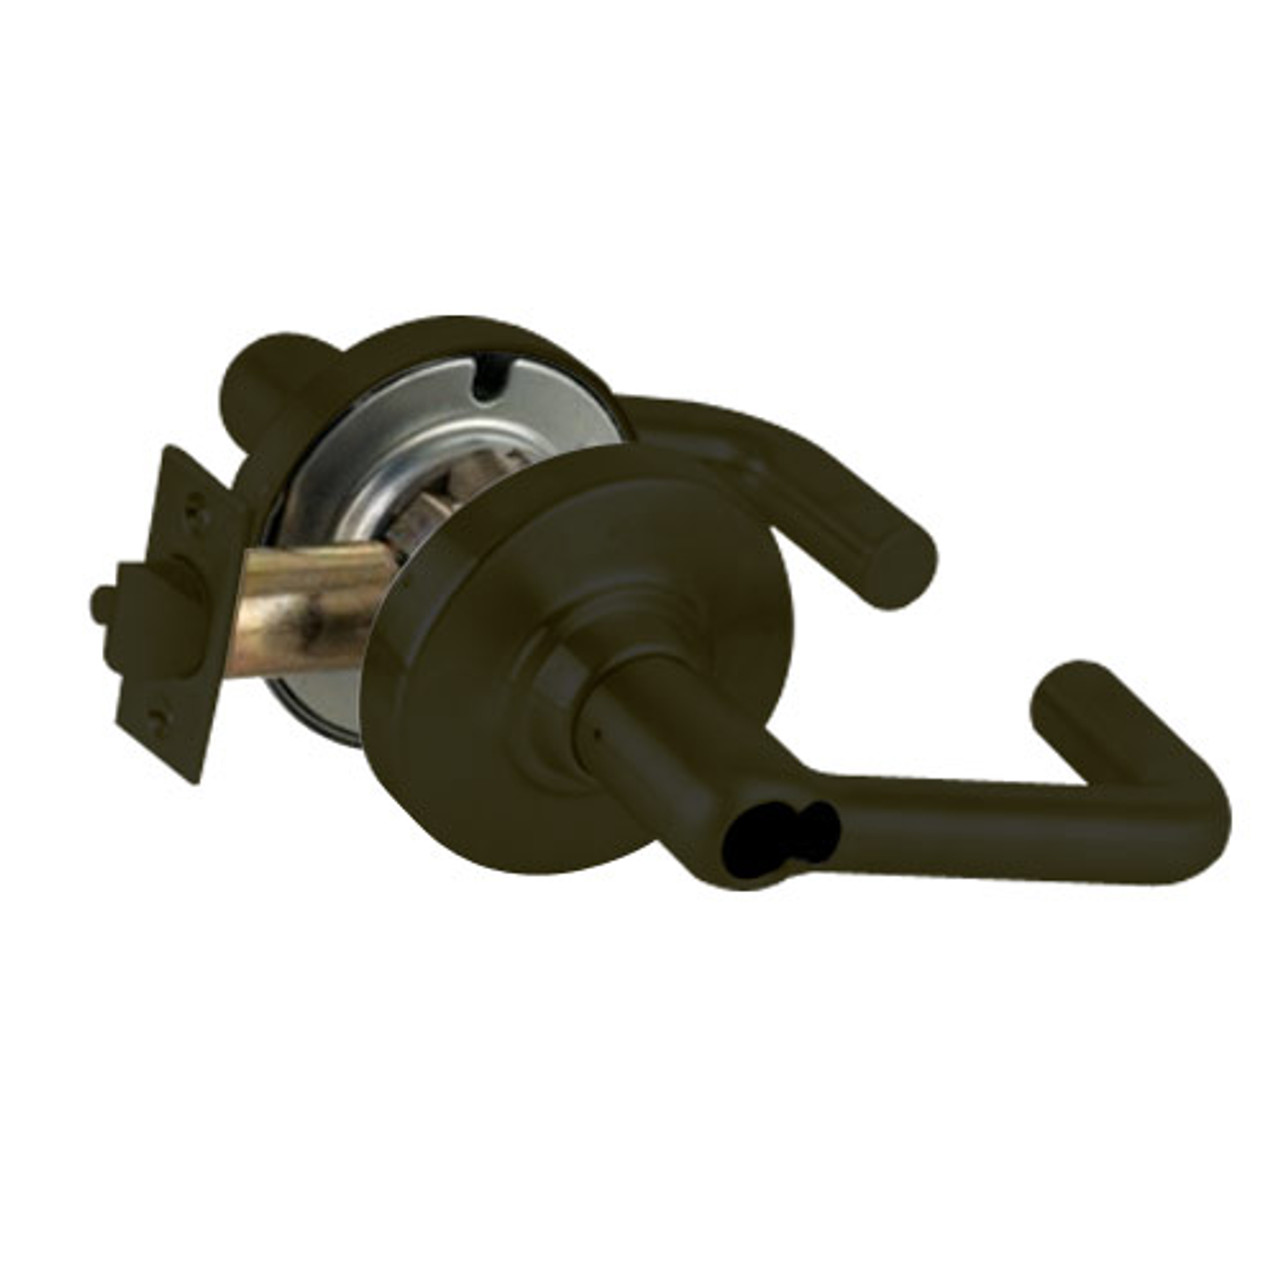 ND50JD-TLR-613 Schlage Tubular Cylindrical Lock in Oil Rubbed Bronze